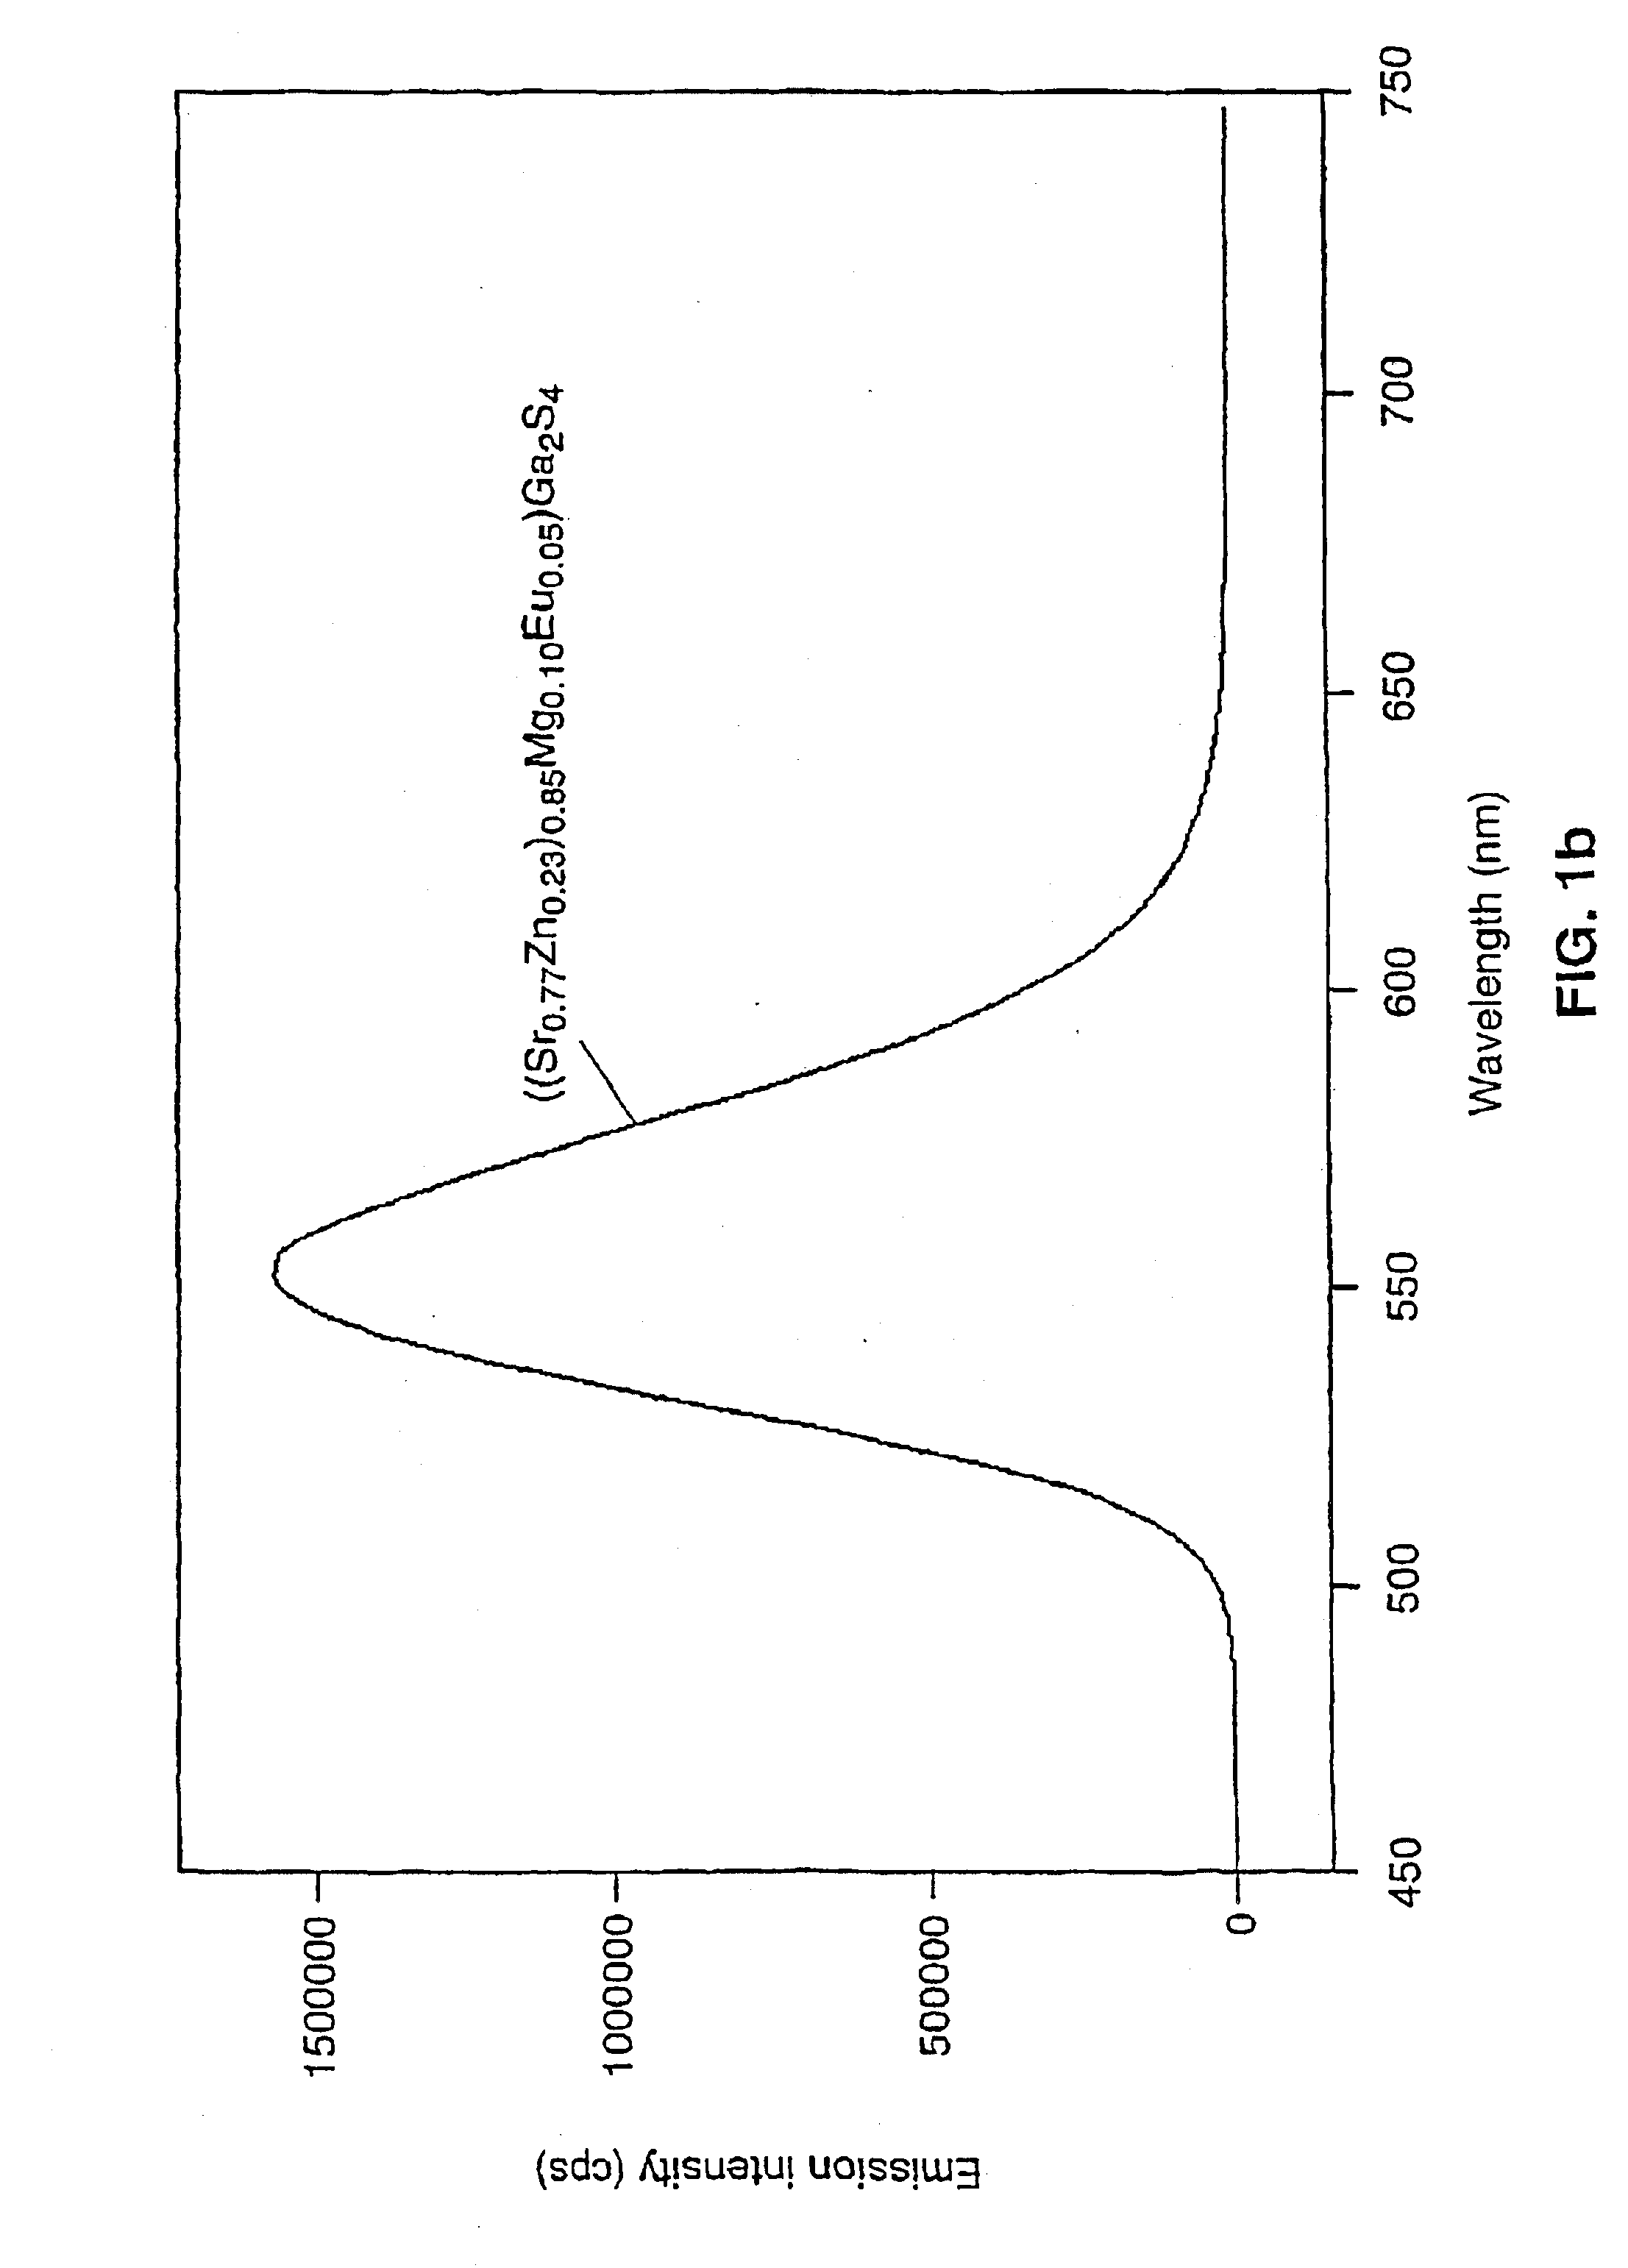 Light emitting device for generating specific colored light, including white light